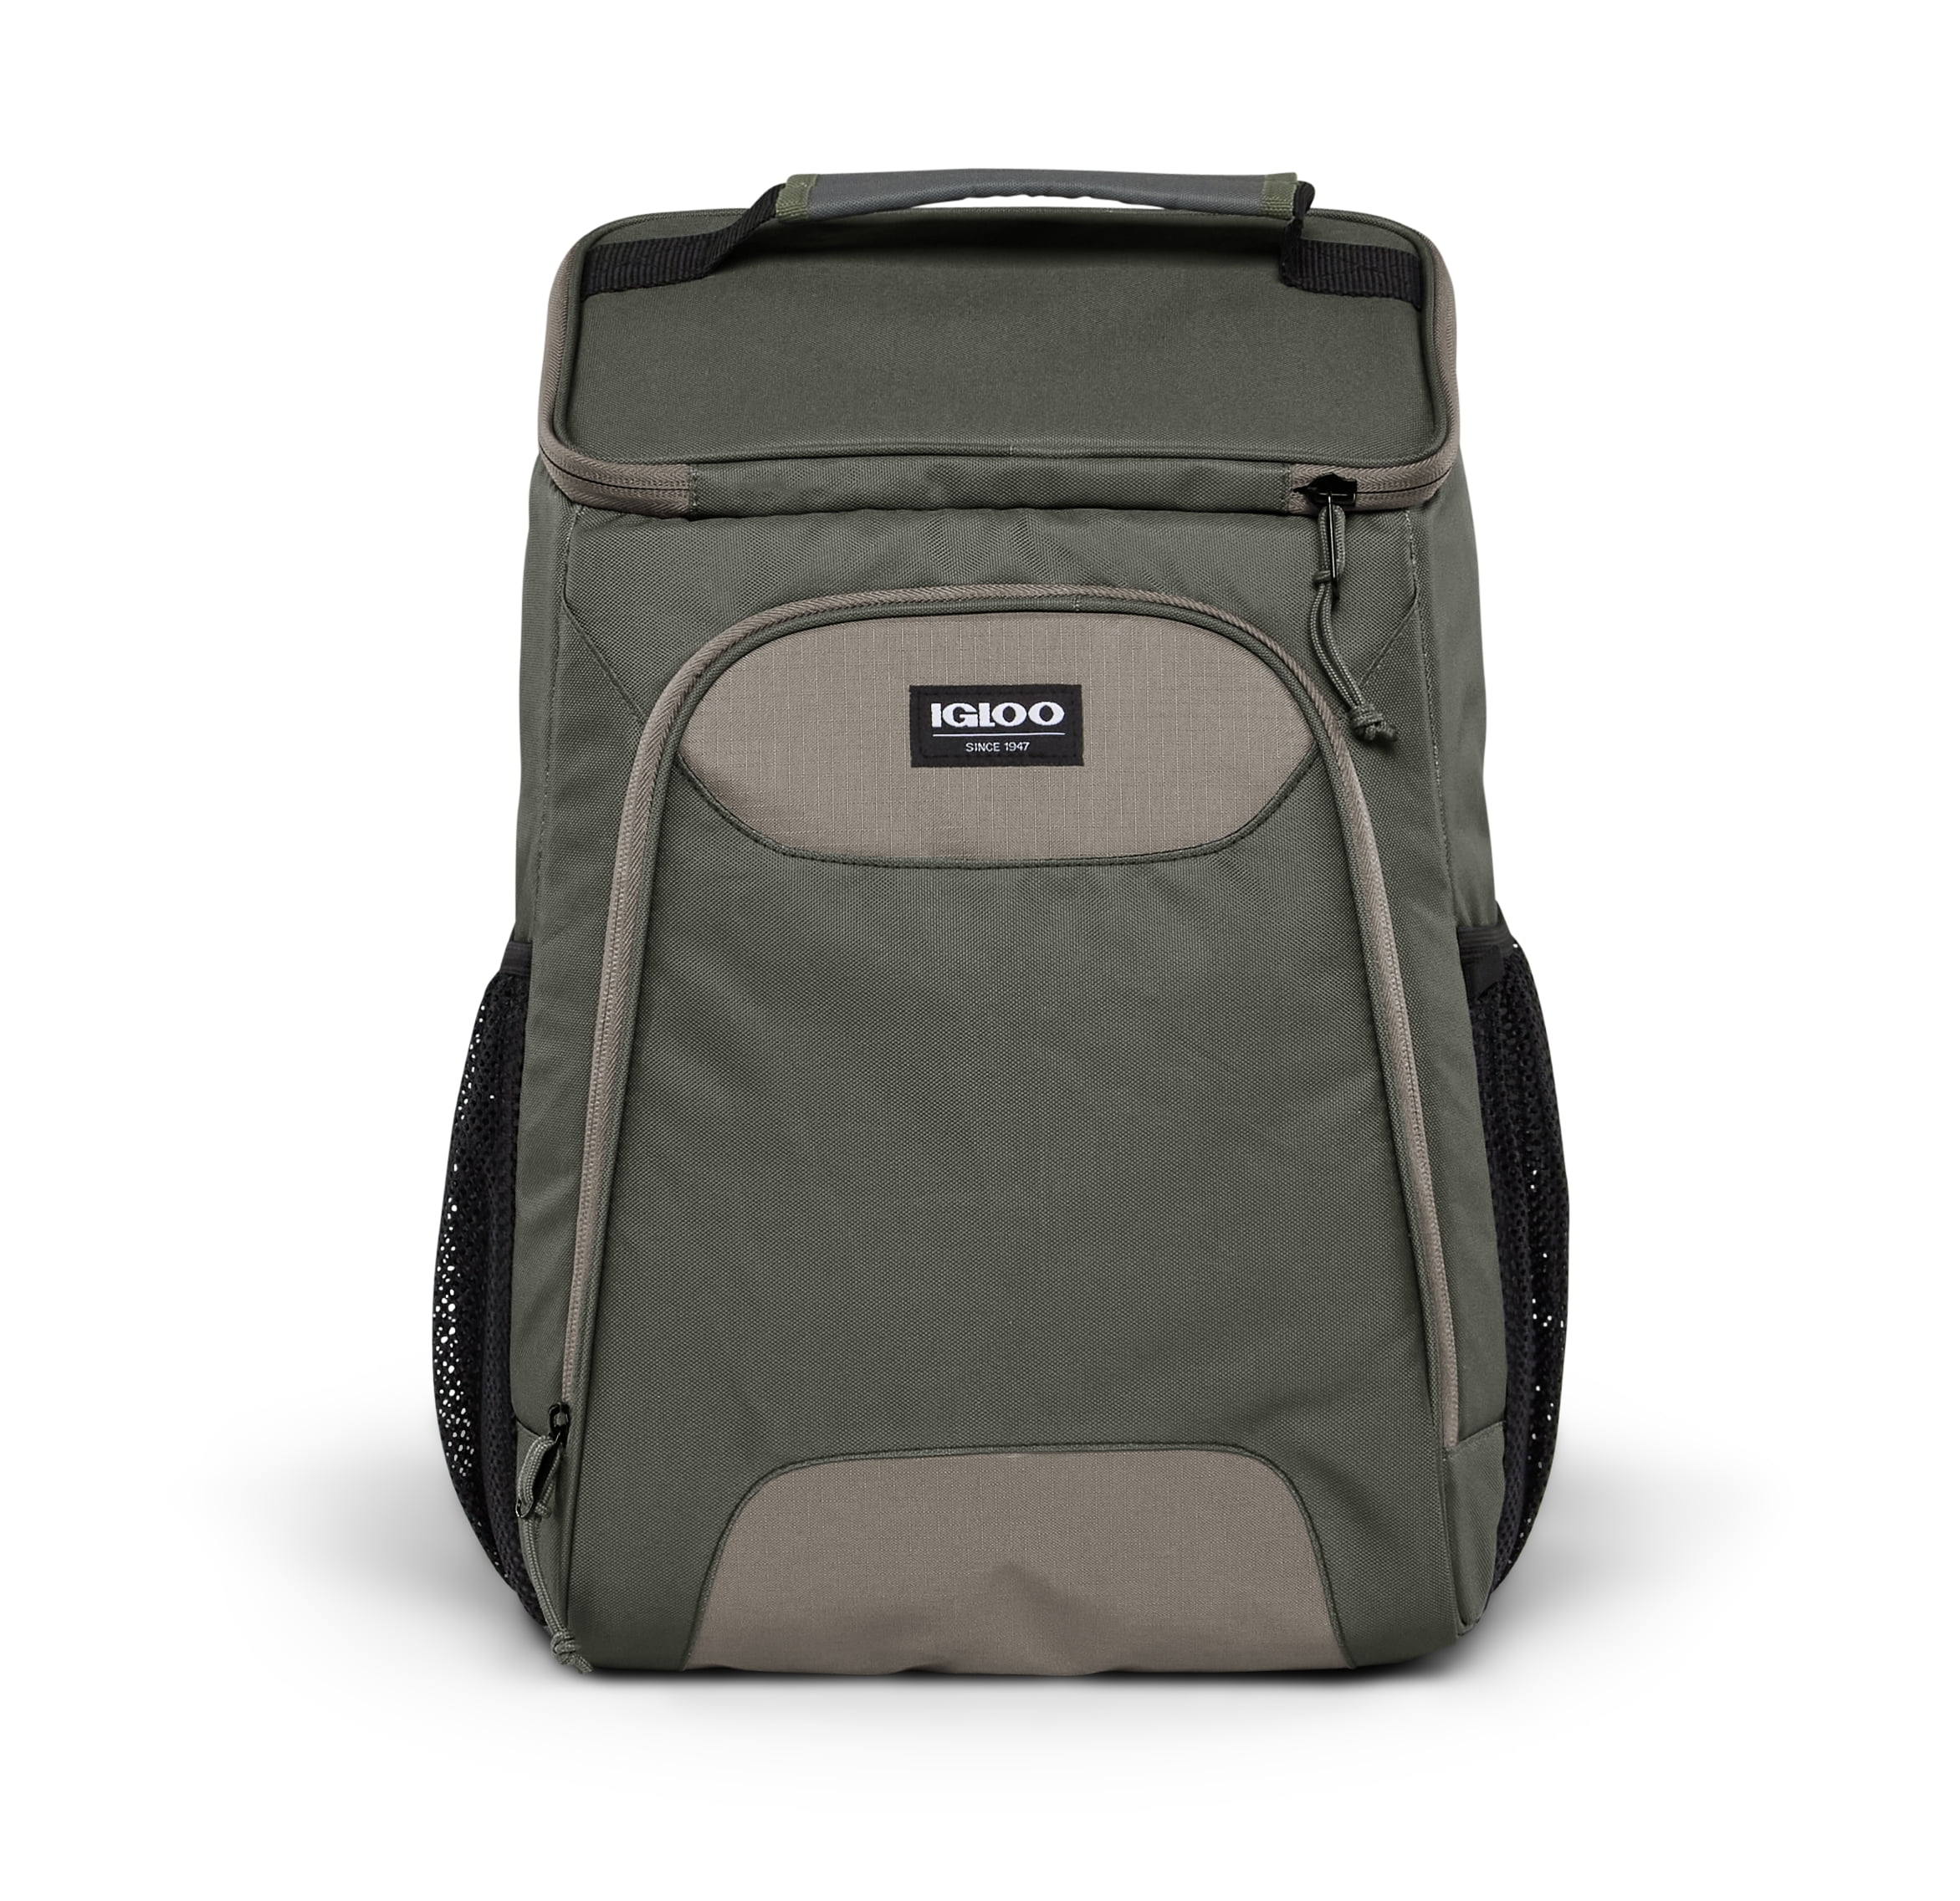 Igloo 24 Can Topgrip Soft Sided Cooler Backpack, Green - Walmart.com